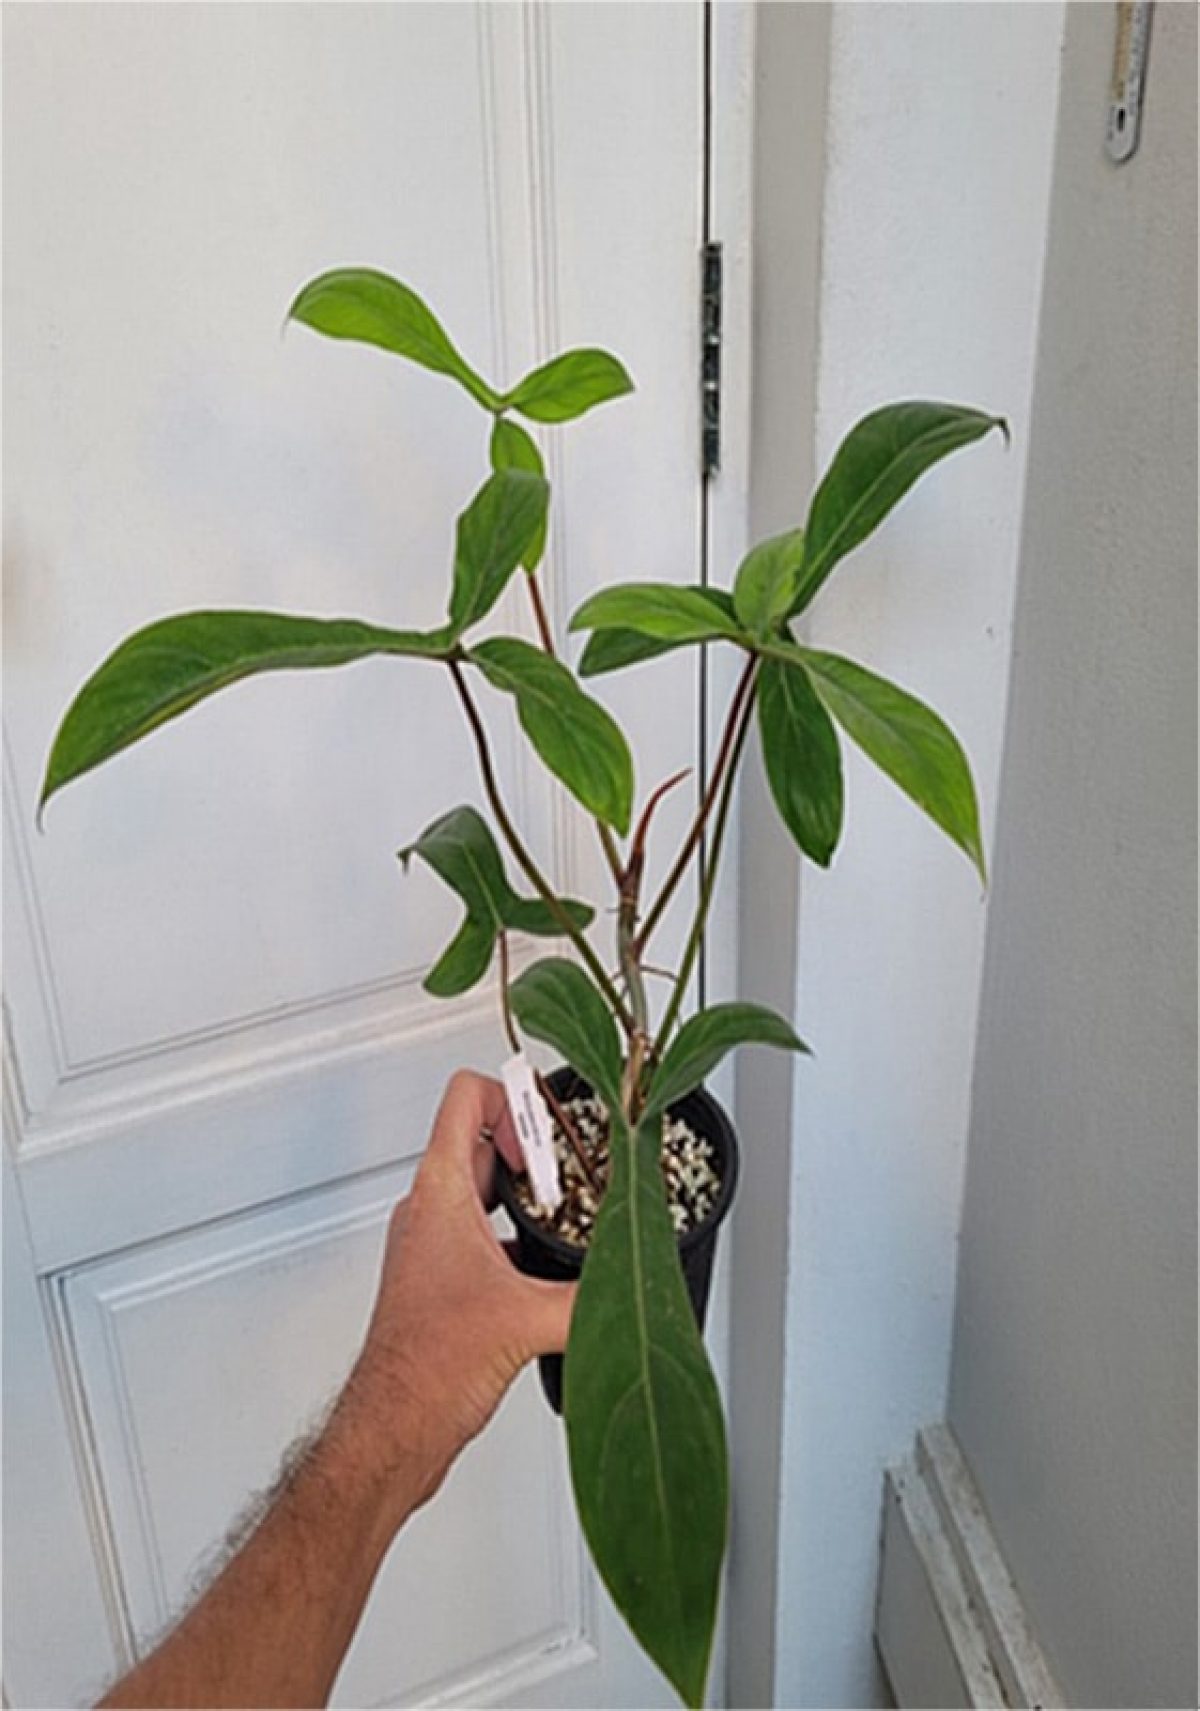 Rare Philodendron Plants Online Shop - Page 2 of 3 - Tropics @Home